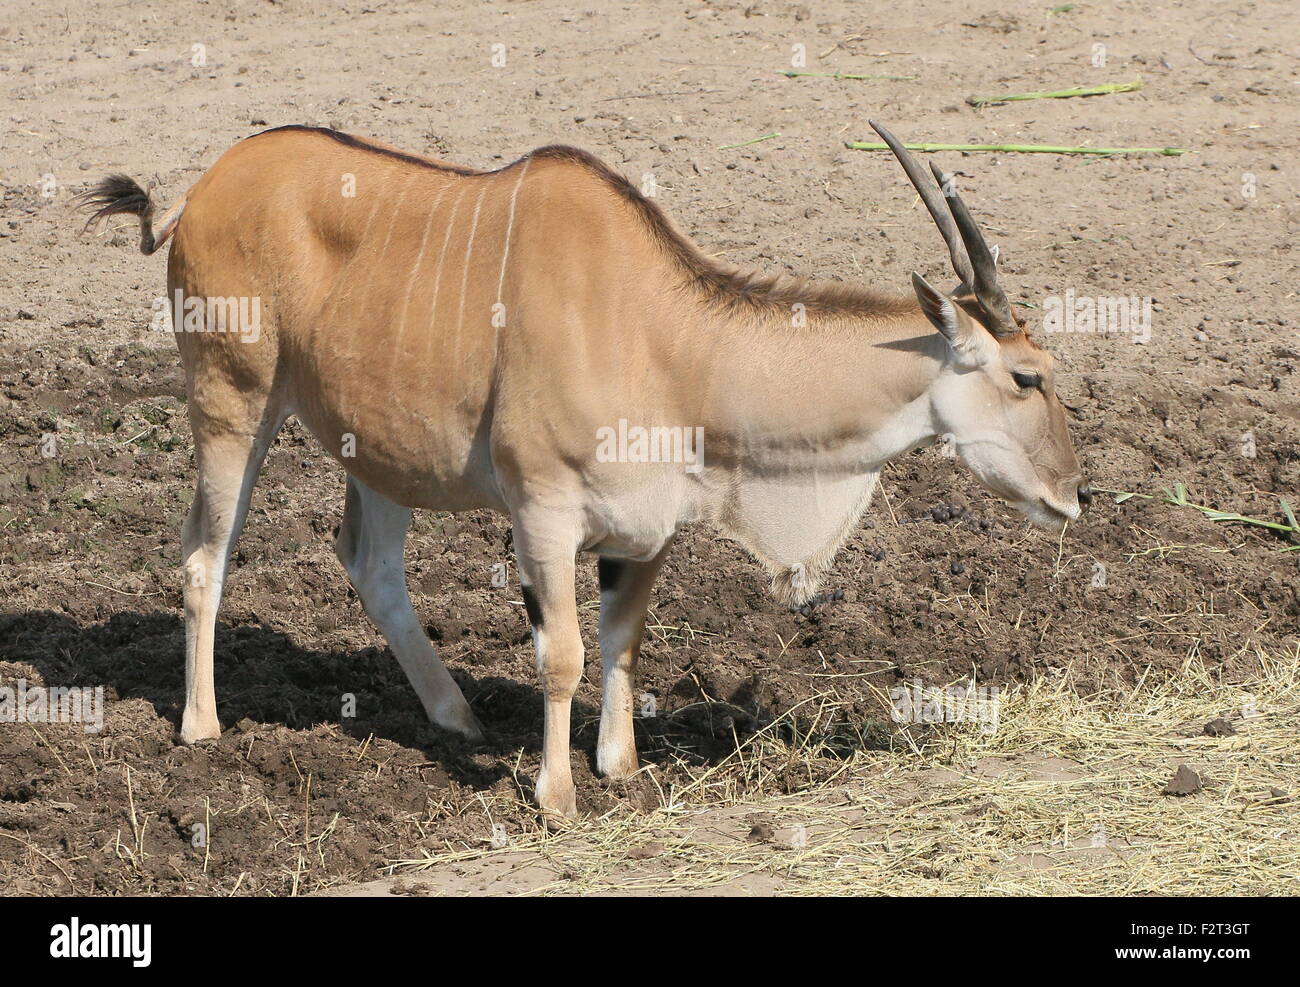 African Southern or Common Eland antelope (Taurotragus oryx) Stock Photo